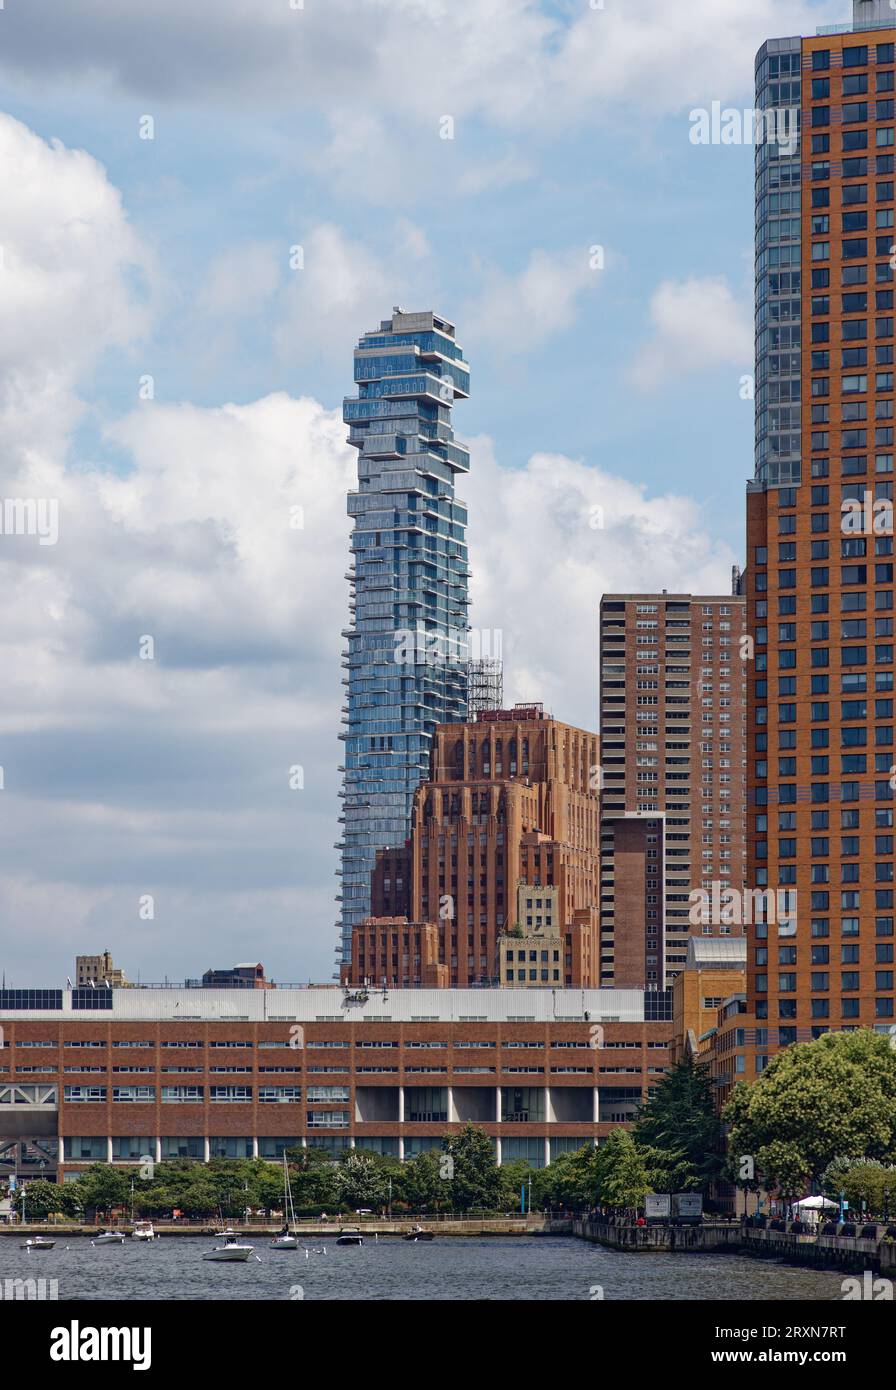 56 Leonard Street, aka Jenga Building, is a Herzog & de Meuron residential design completed in 2017; condos there are among the priciest in NYC. Stock Photo